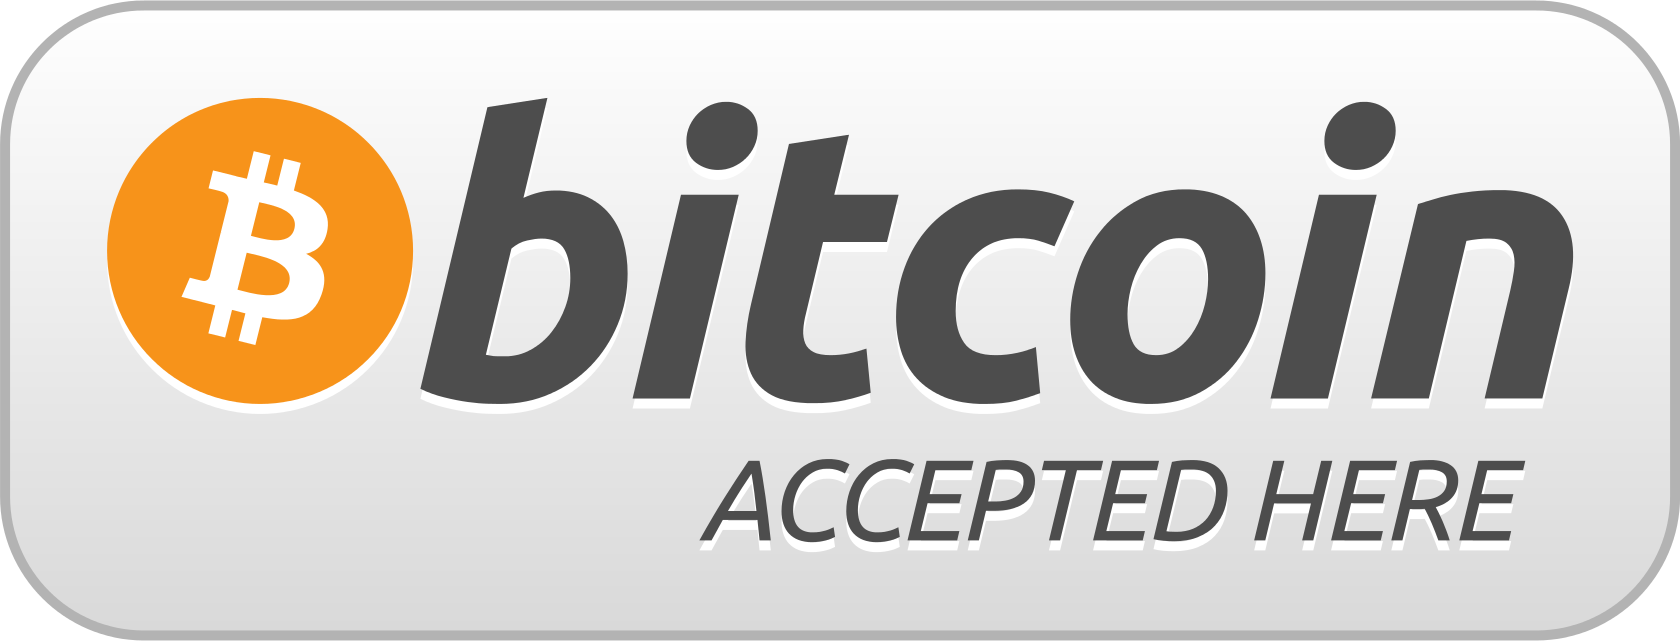 Bitcoin accepted here printable